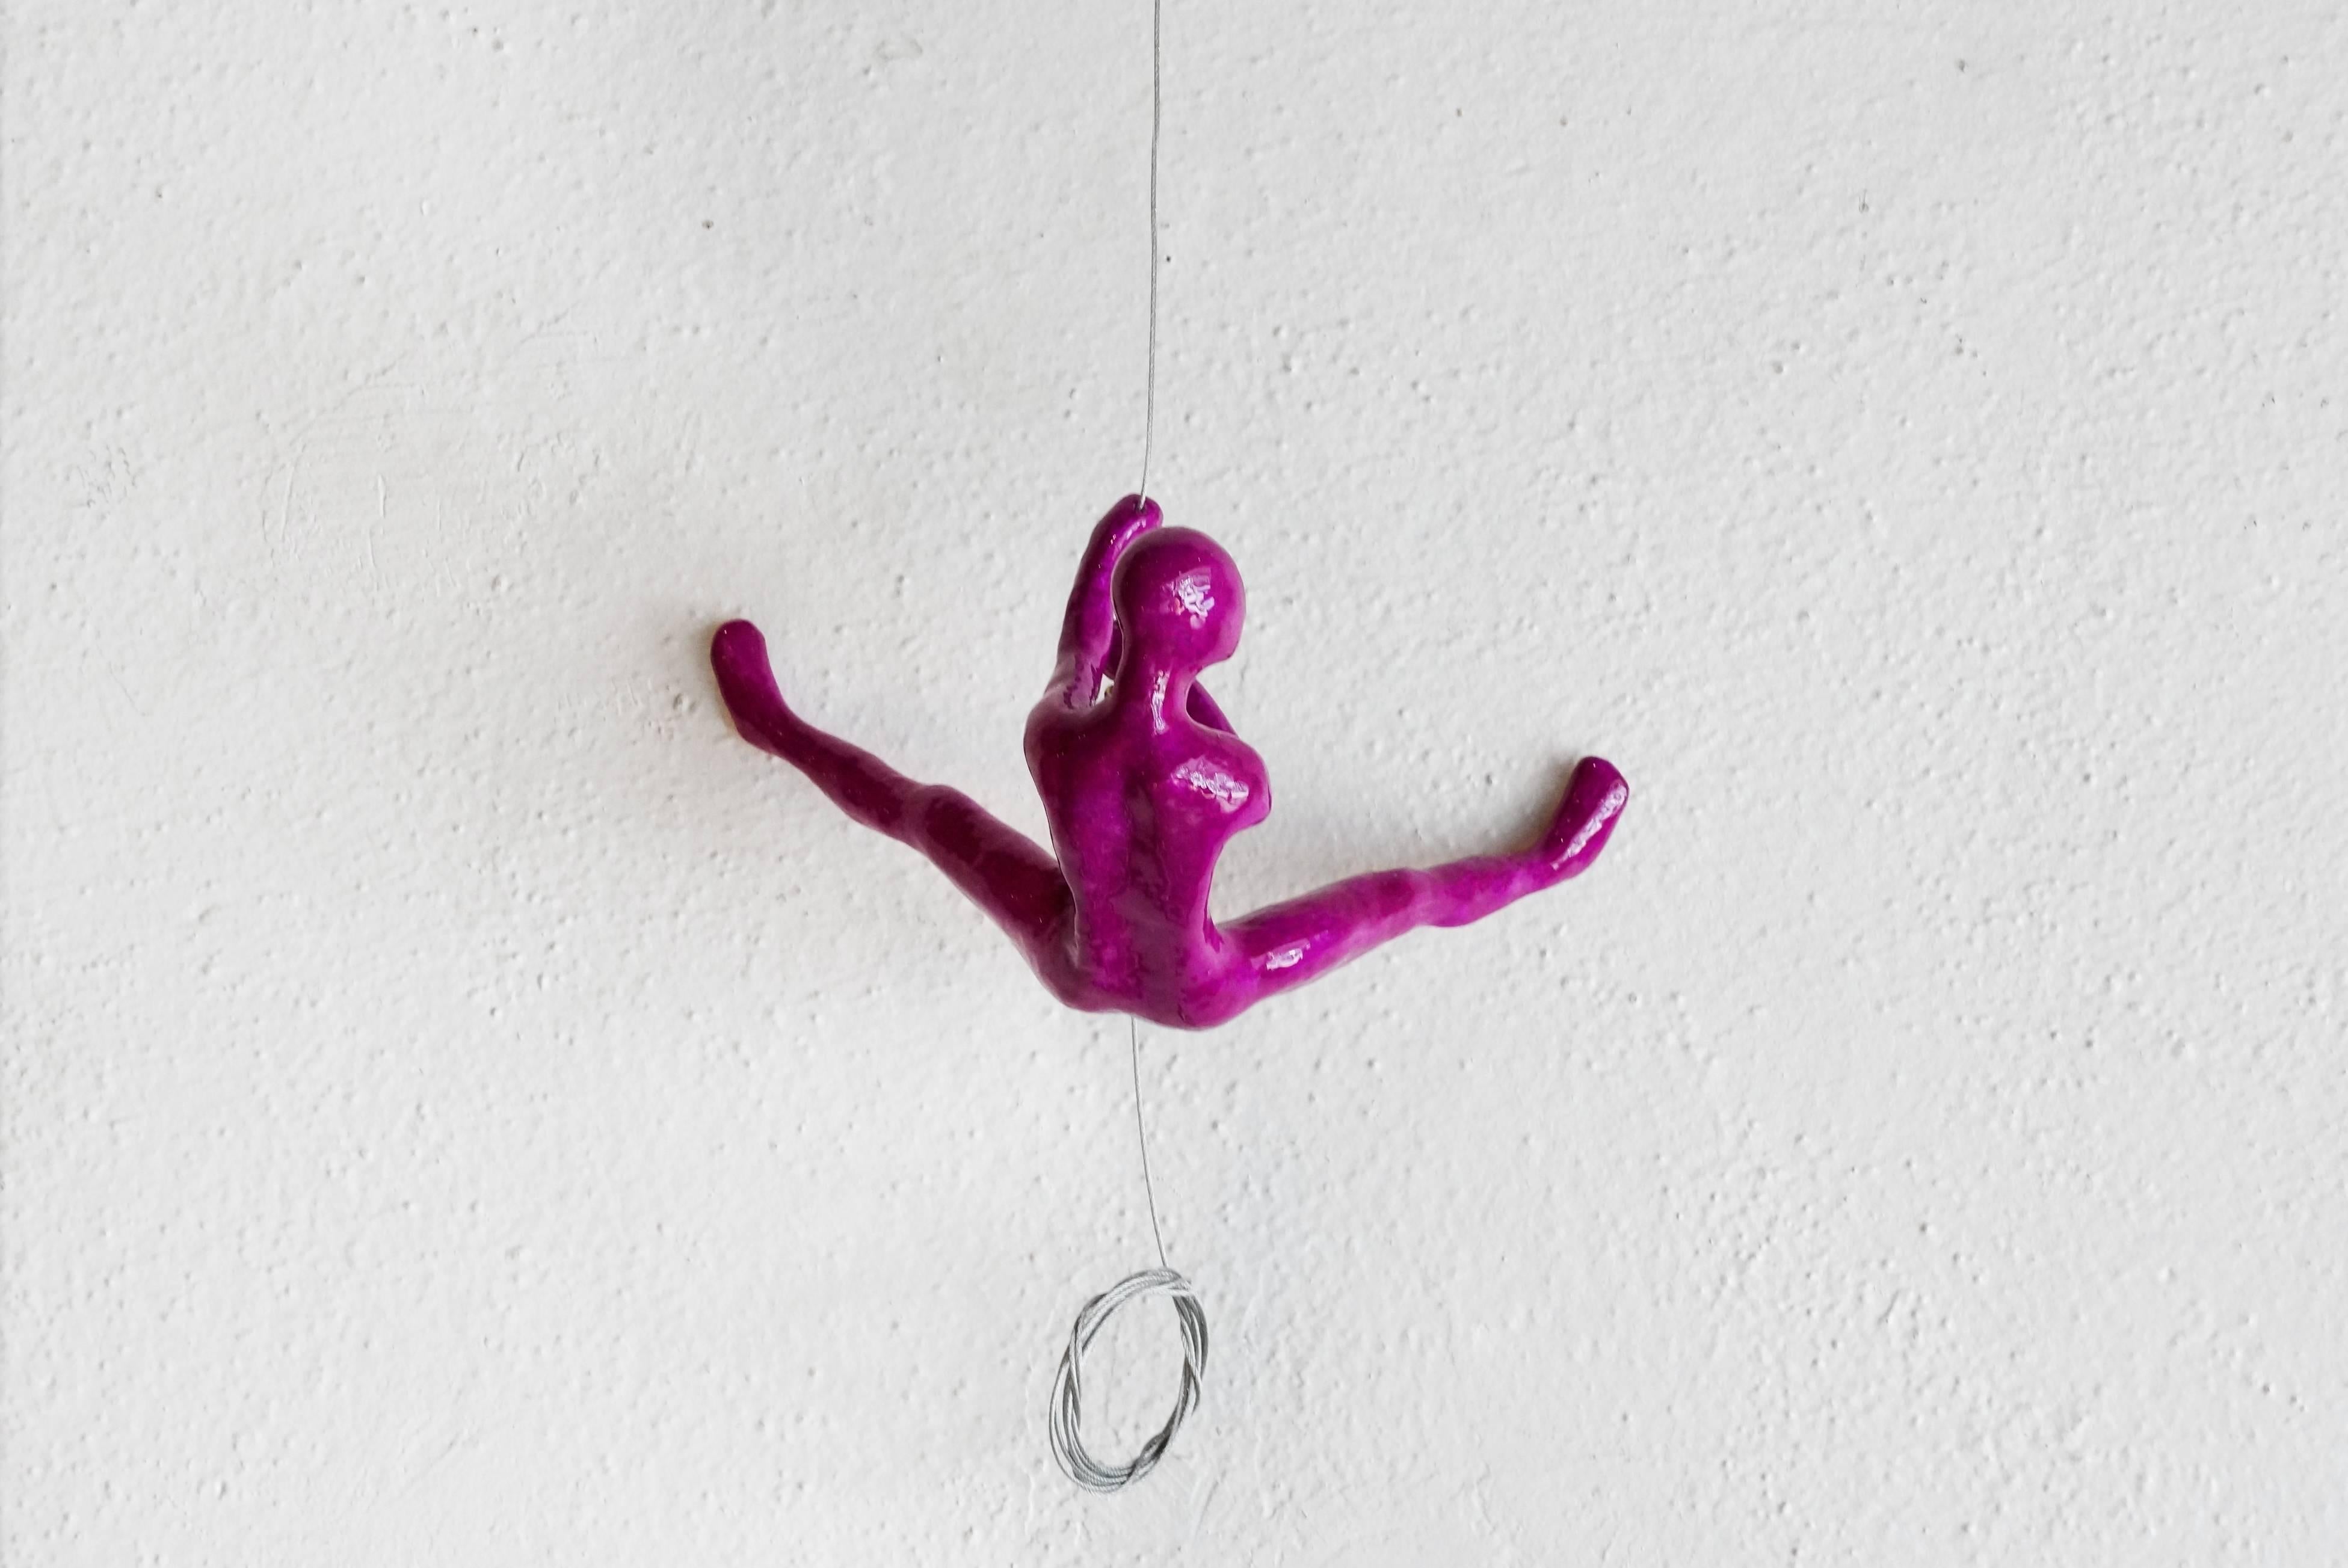 Wall Climber sculpture in magenta by artist Ancizar Marin (Colombian, b. 1968). Signed and dated. 

Additional Information
Marin makes colorful wall climber sculptures of ceramic, fiberglass and resin. Symbolic to rock climbers, they repel down